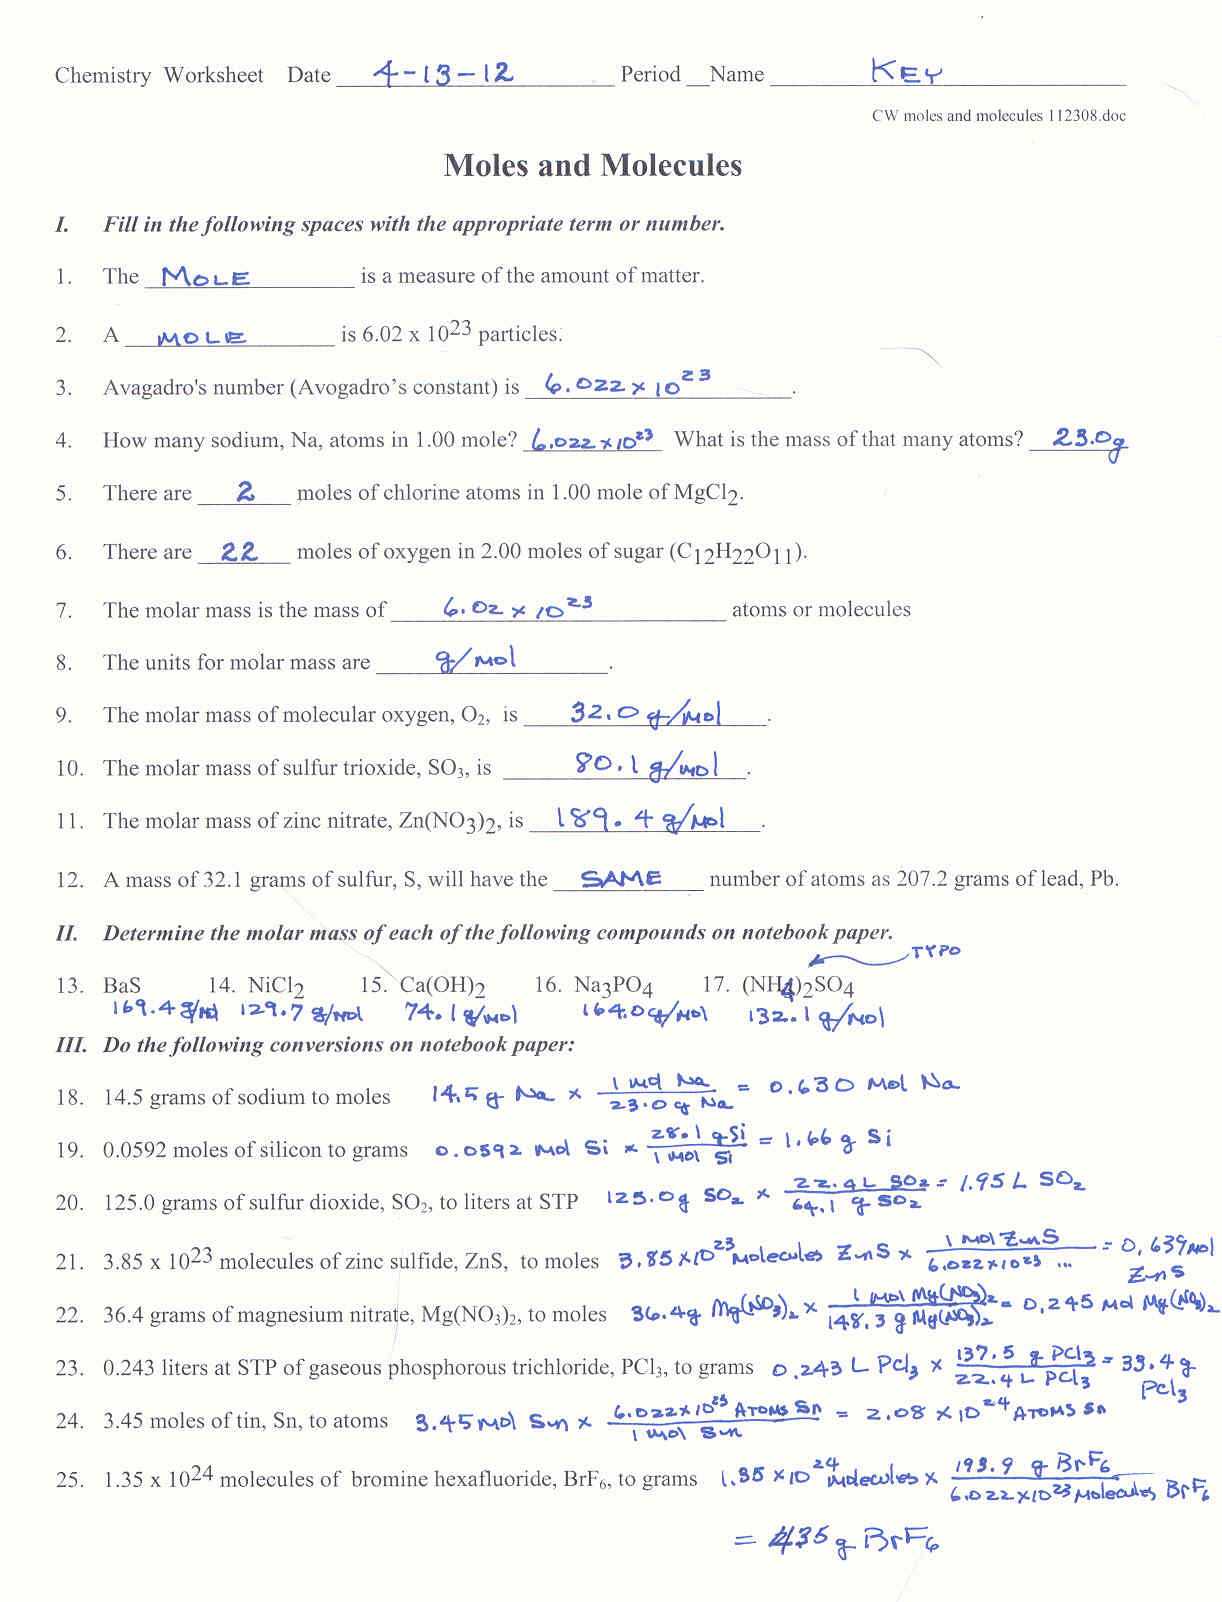 The Electromagnetic Spectrum Worksheet Answers or Electromagnetic Spectrum Coloring Worksheet Image Collections